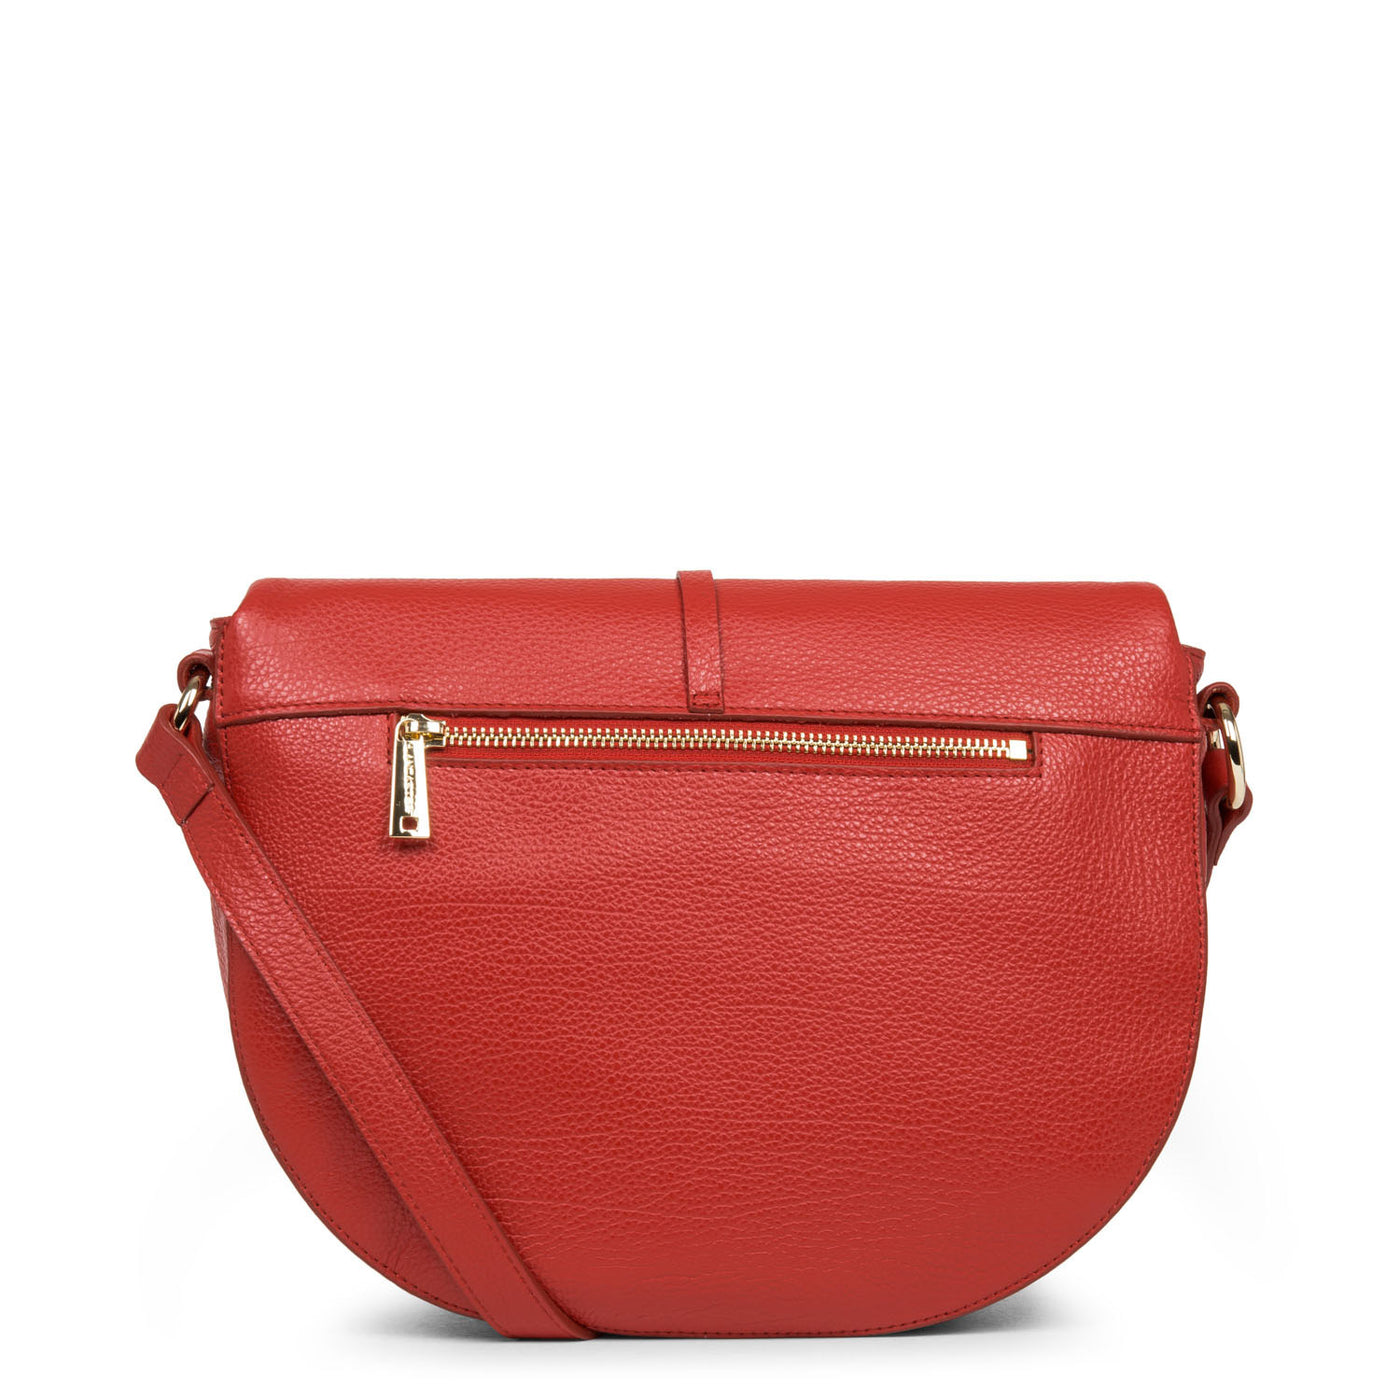 sac besace - dune #couleur_rouge